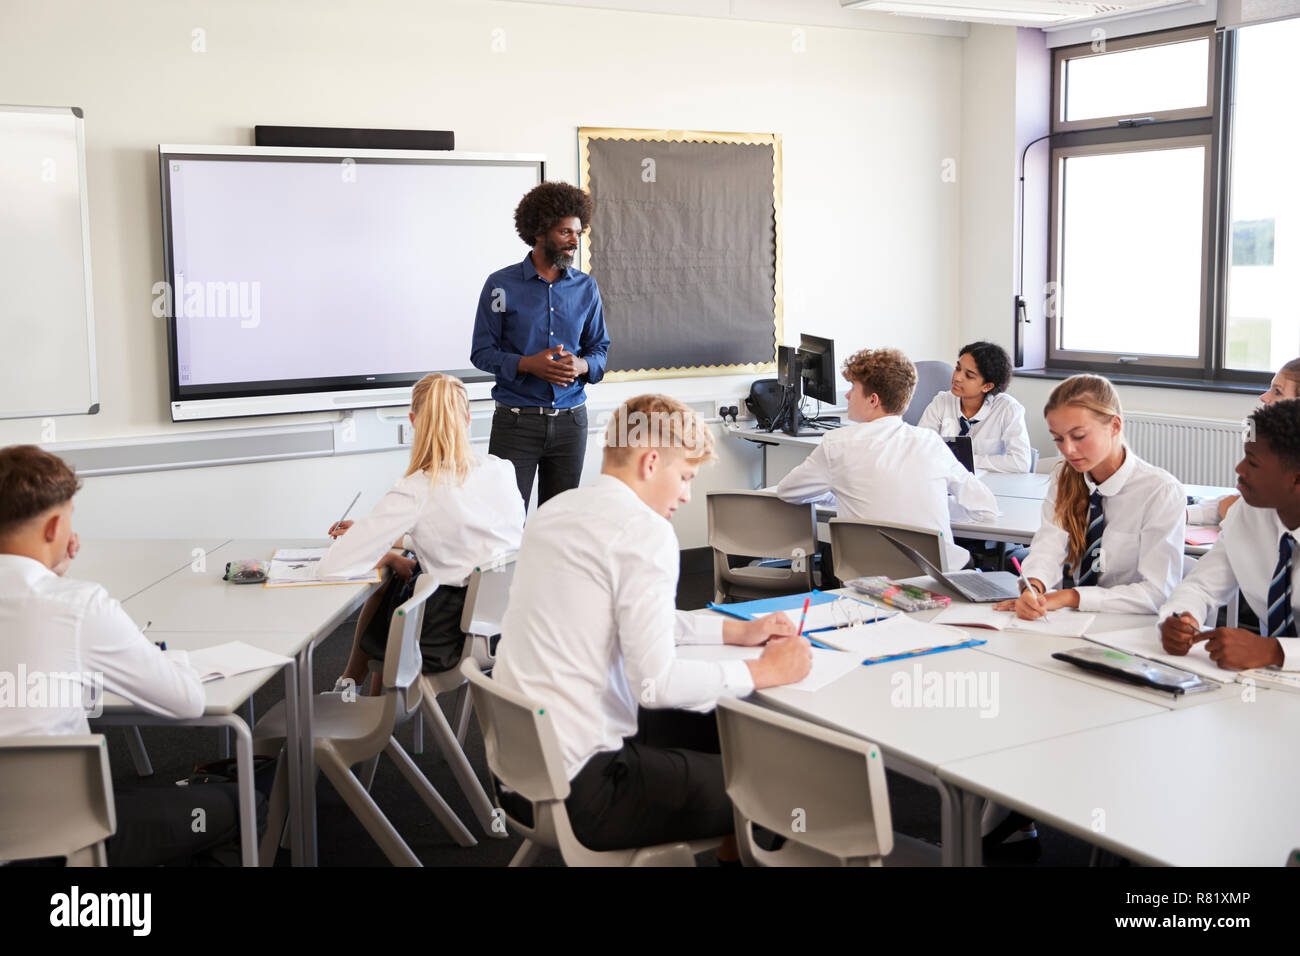 Male High School Teacher Standing Next To Interactive Whiteboard And Teaching Lesson To Pupils Wearing Uniform Stock Photo